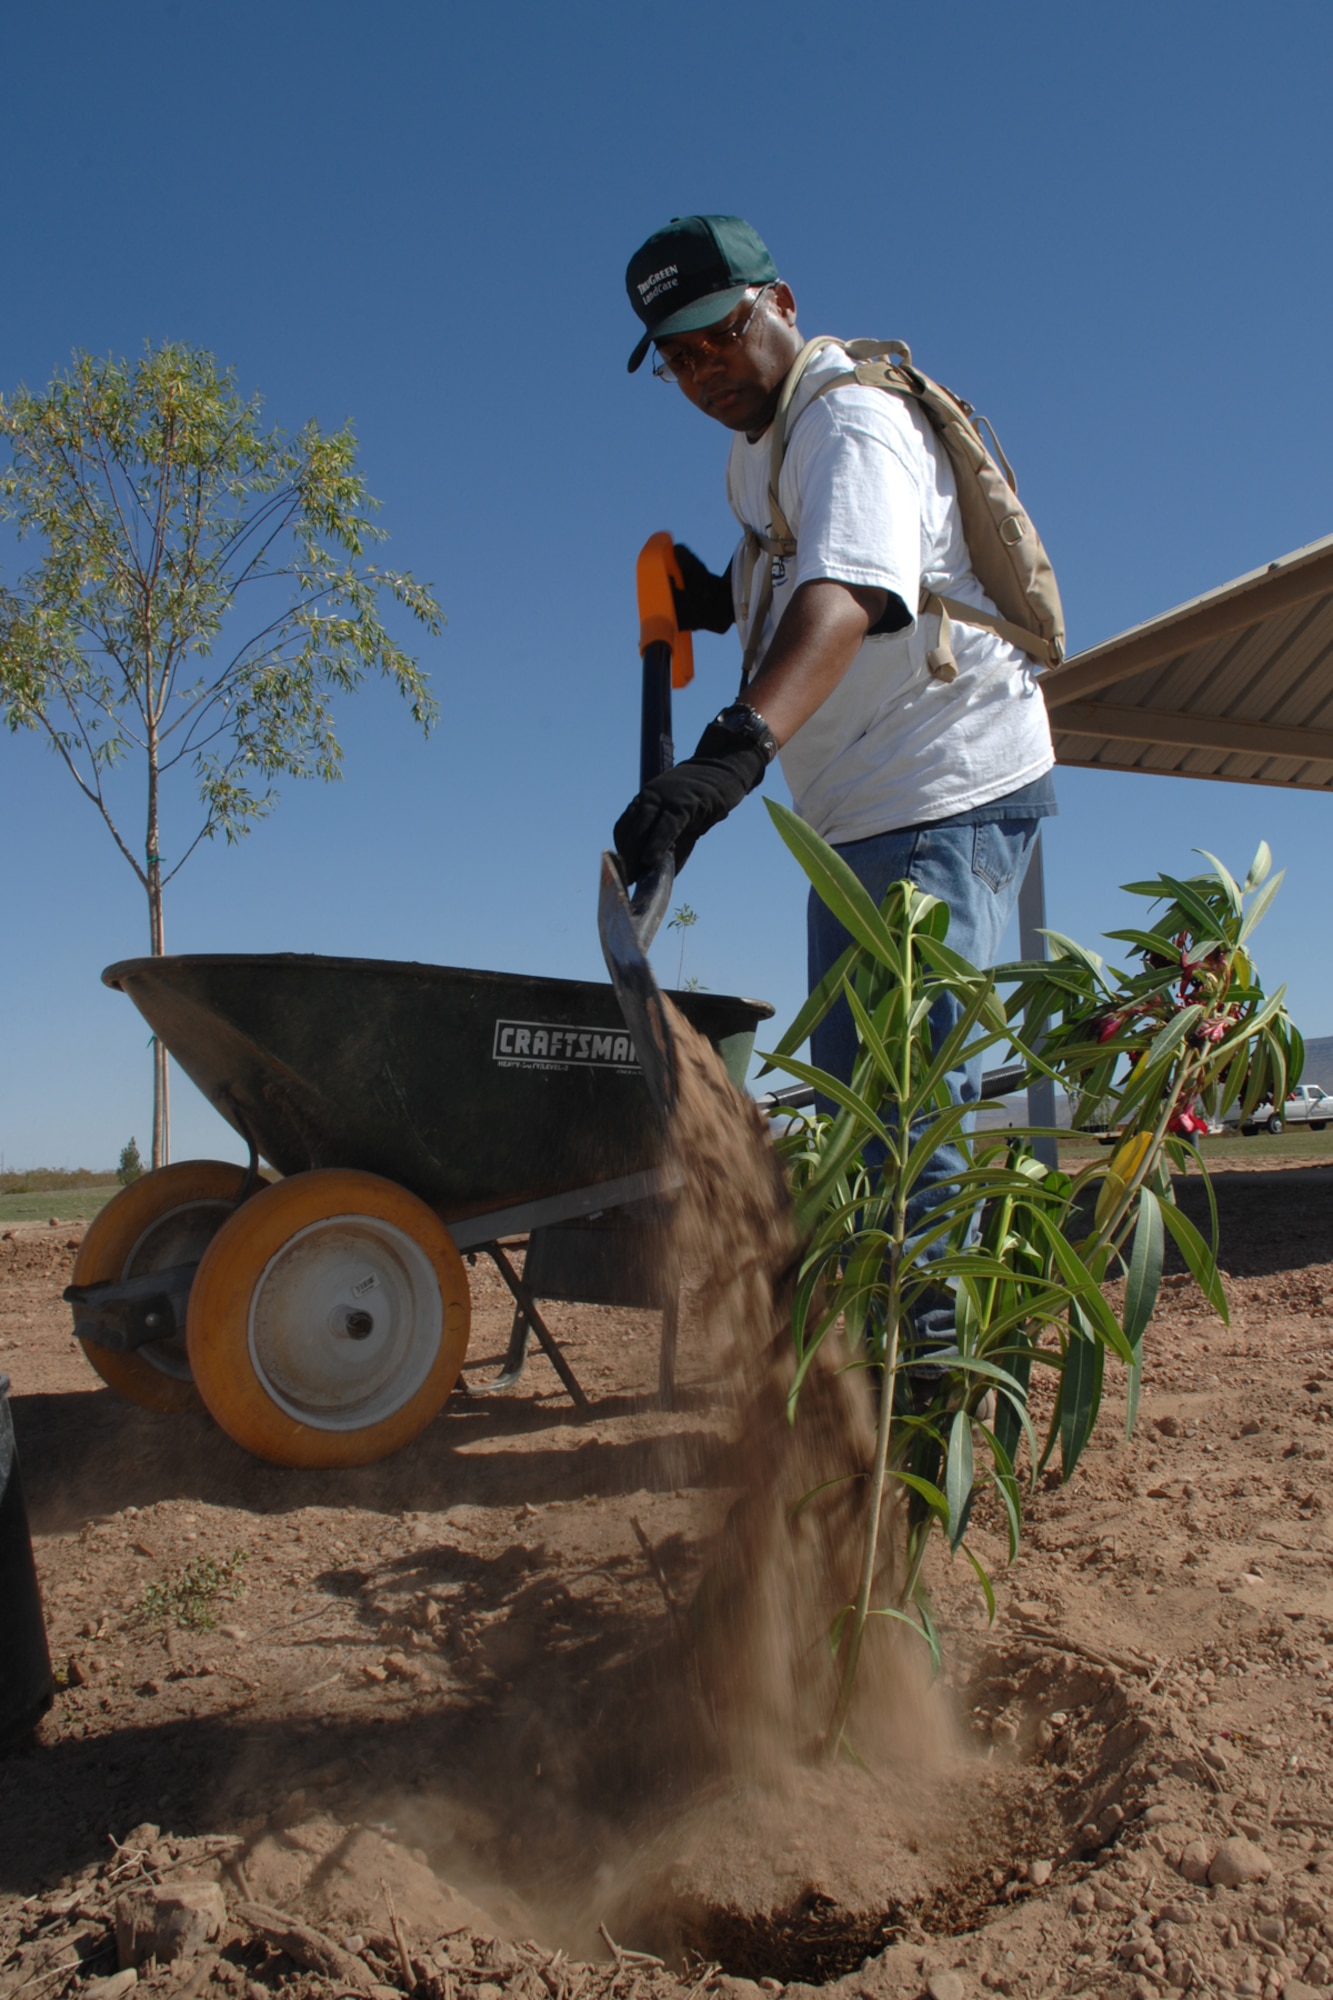 Tech. Sgt. Delano Hill, 49th Aircraft Maintenance Squadron, adds soil to a shrub May 6 at Tierra De Suenos Park in Alamogordo, N.M. Seargent Hill was one of 15 49th Maintenance Group personnel who volunteered to plant trees and shrubs at the park. (U.S. Air Force photo/Airman 1st Class Jamal D. Sutter)